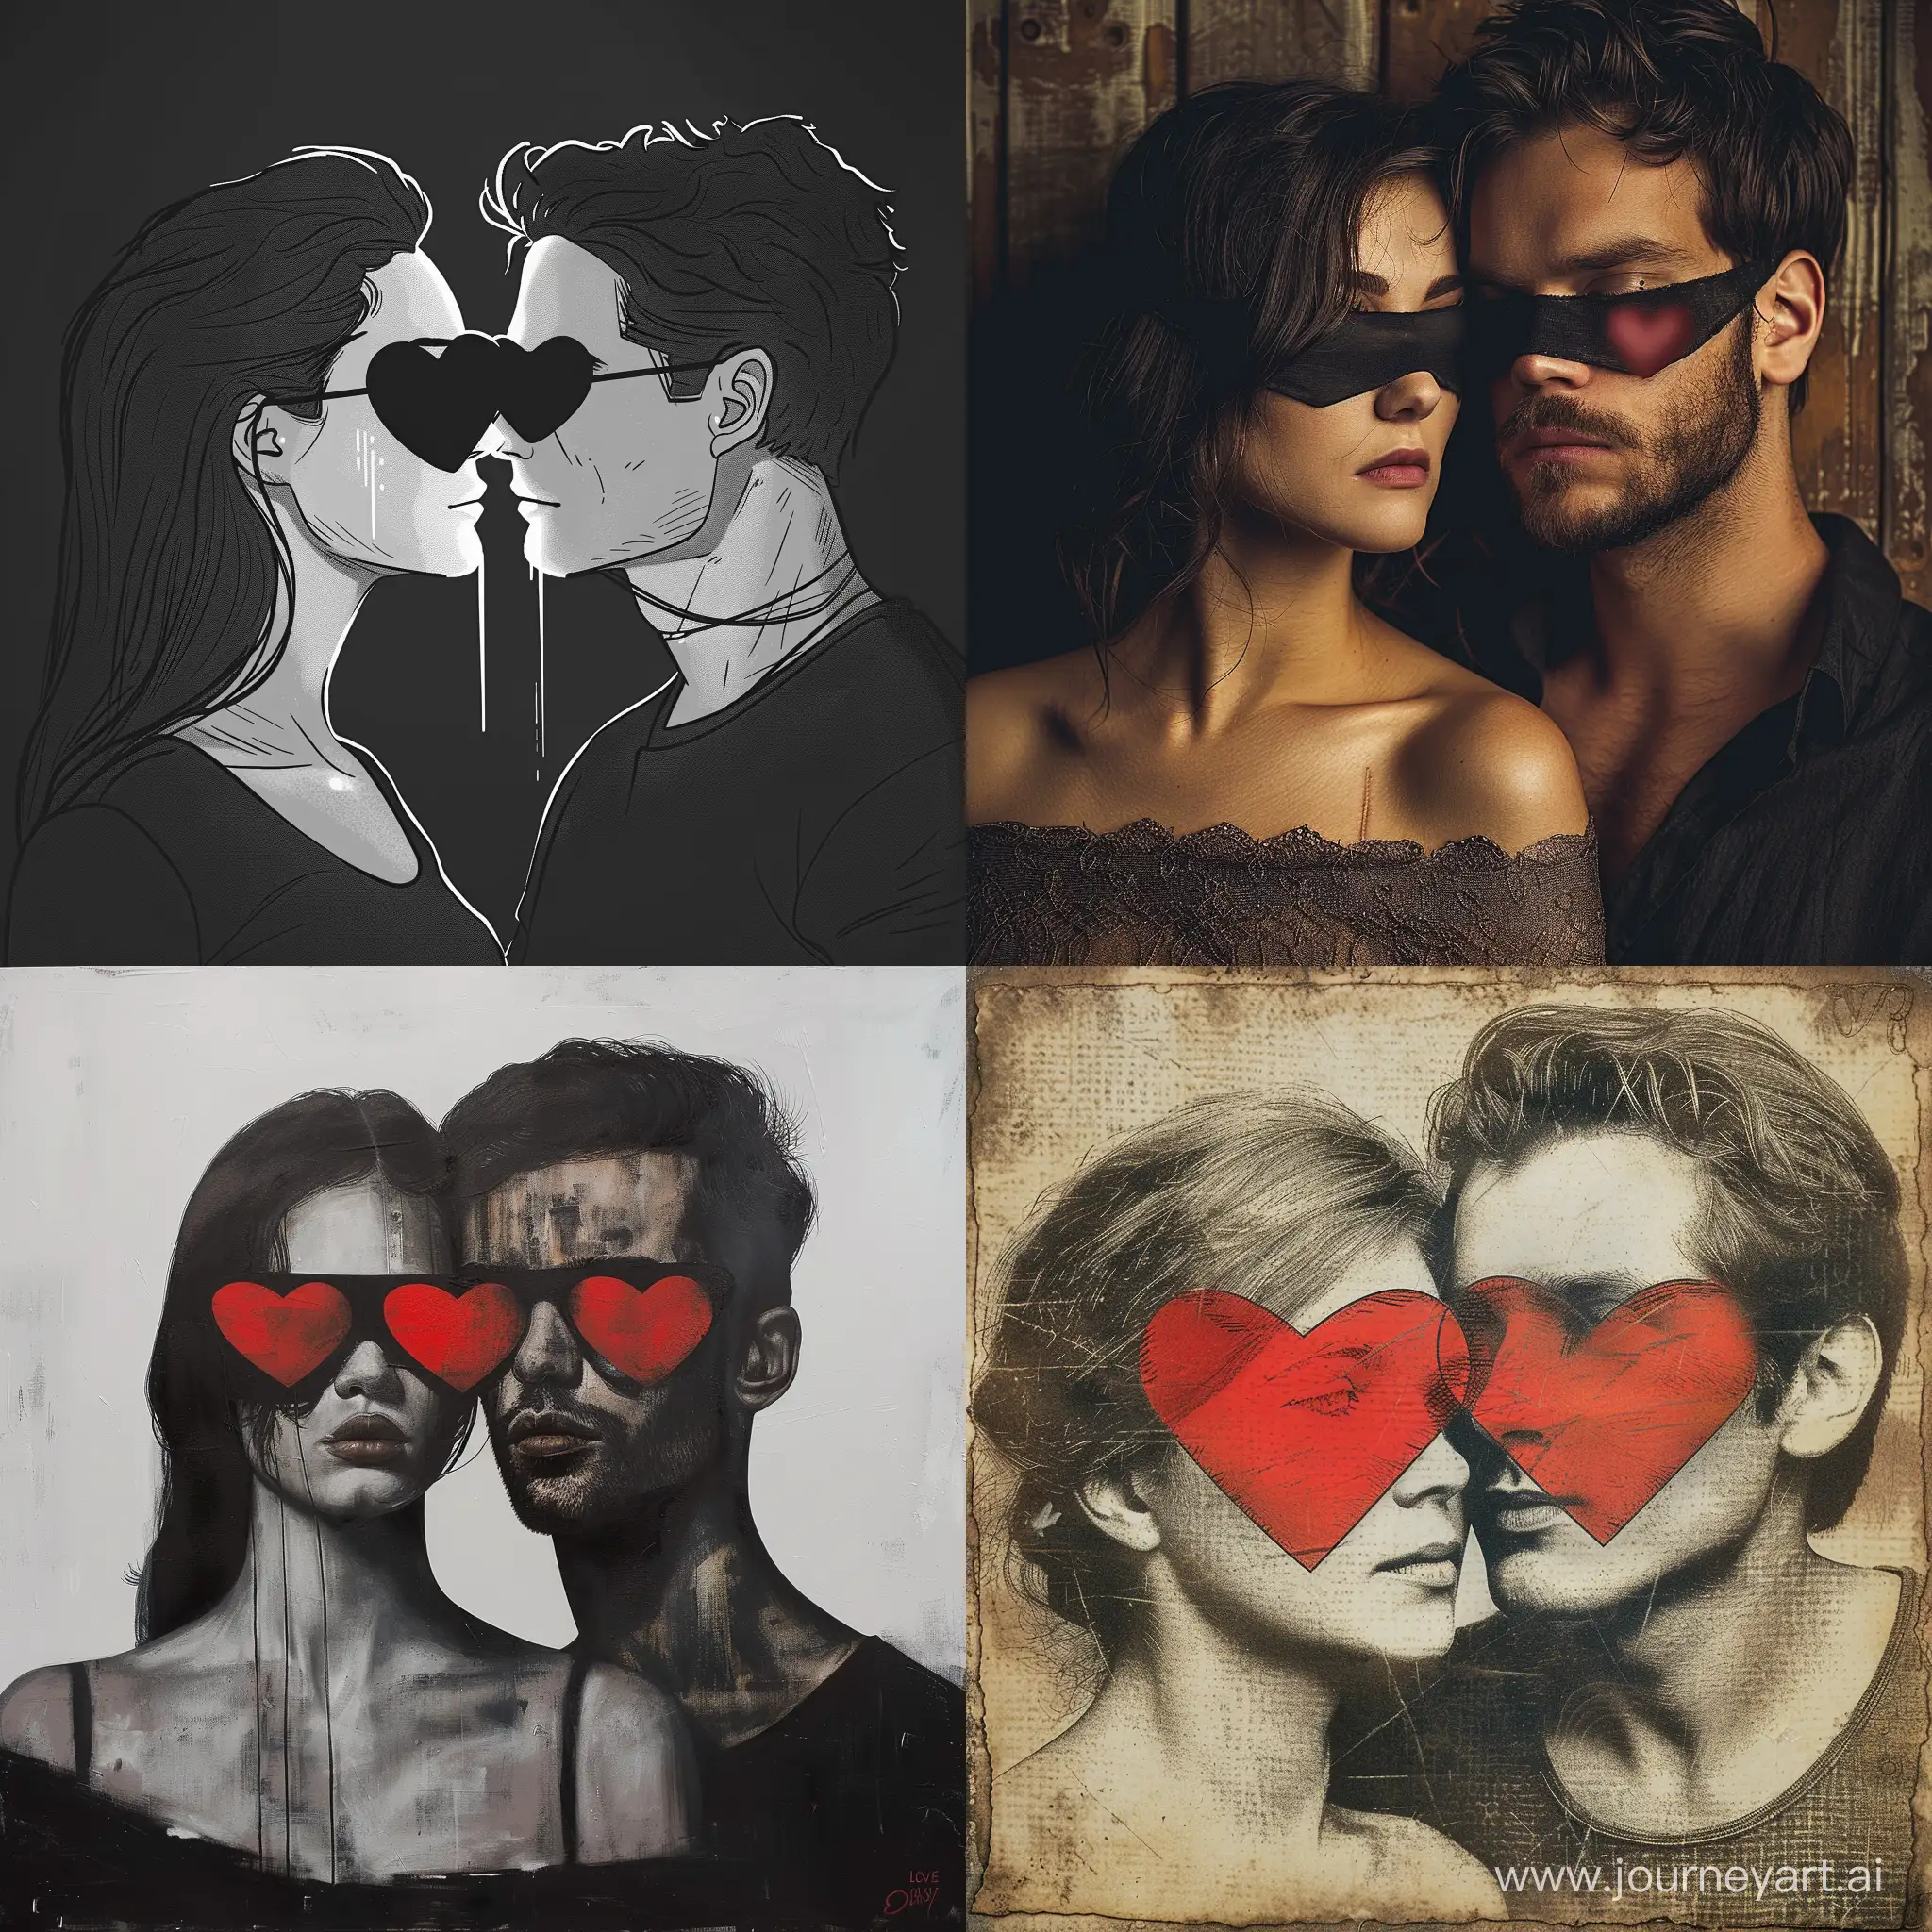 Blindfolded-Lovers-Embracing-in-Romantic-Surrealism